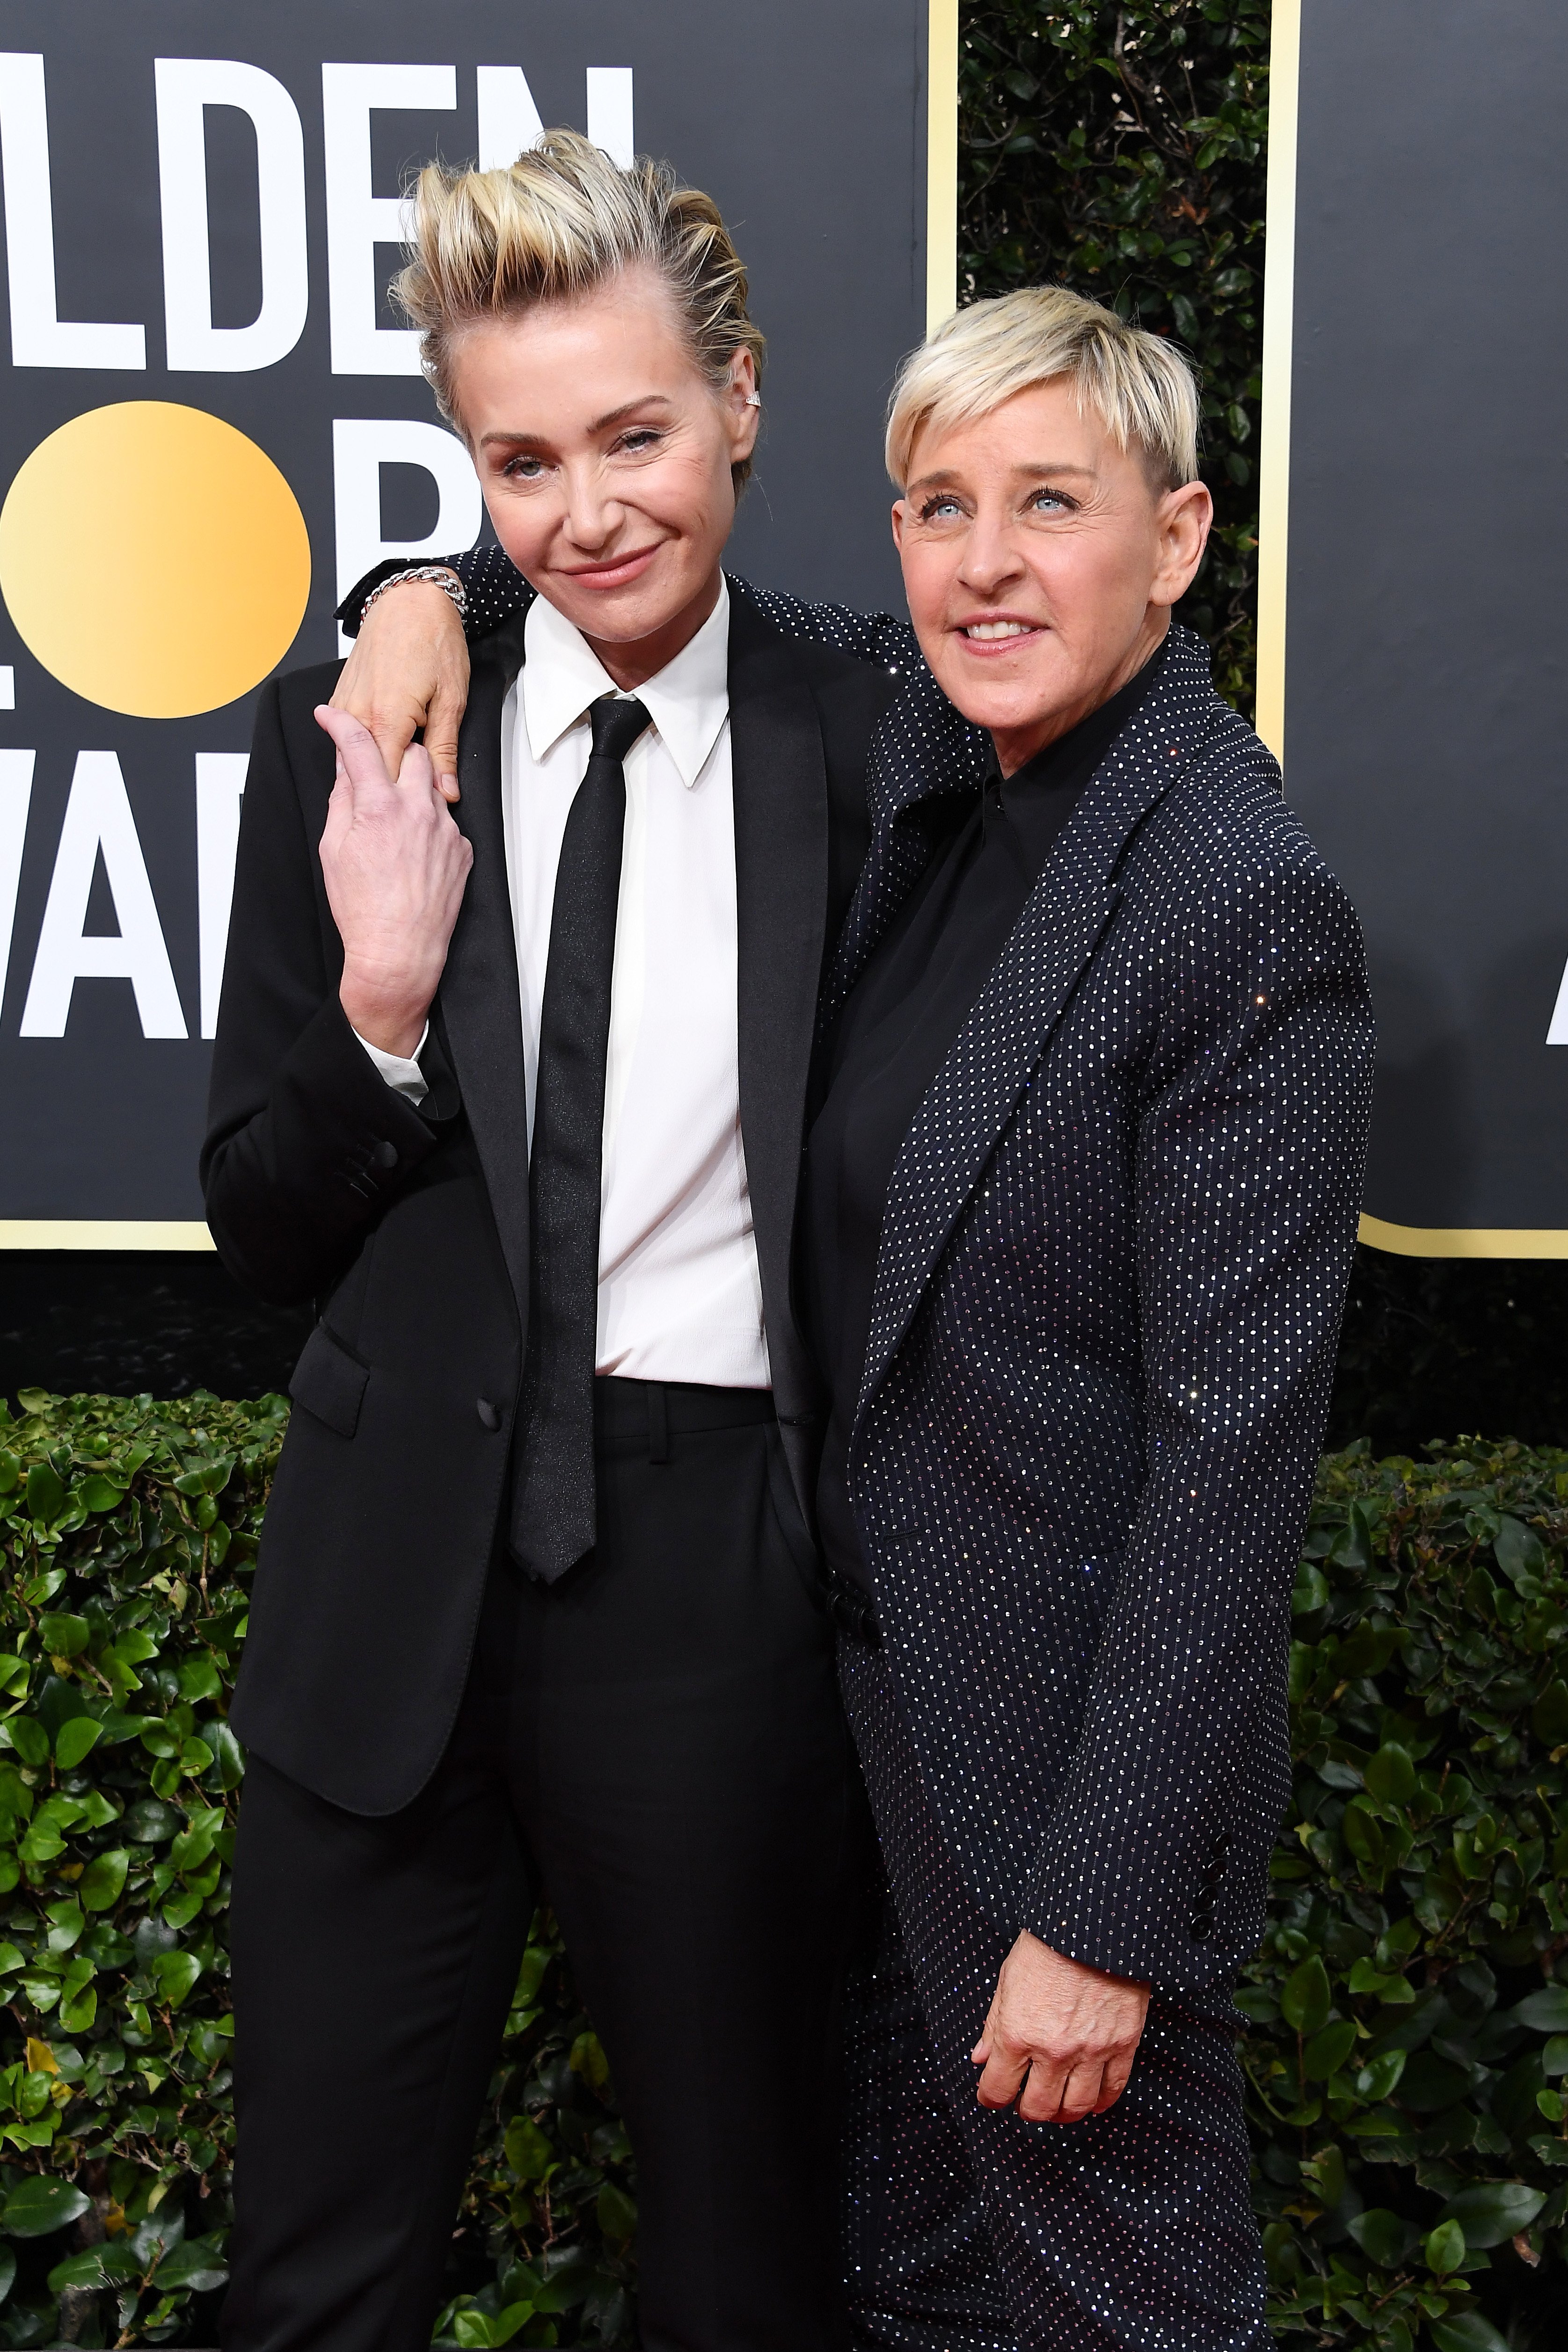 Portia de Rossi and Ellen DeGeneres attend the 77th Annual Golden Globe Awards on January 05, 2020, in Beverly Hills, California. | Source: Getty Images.